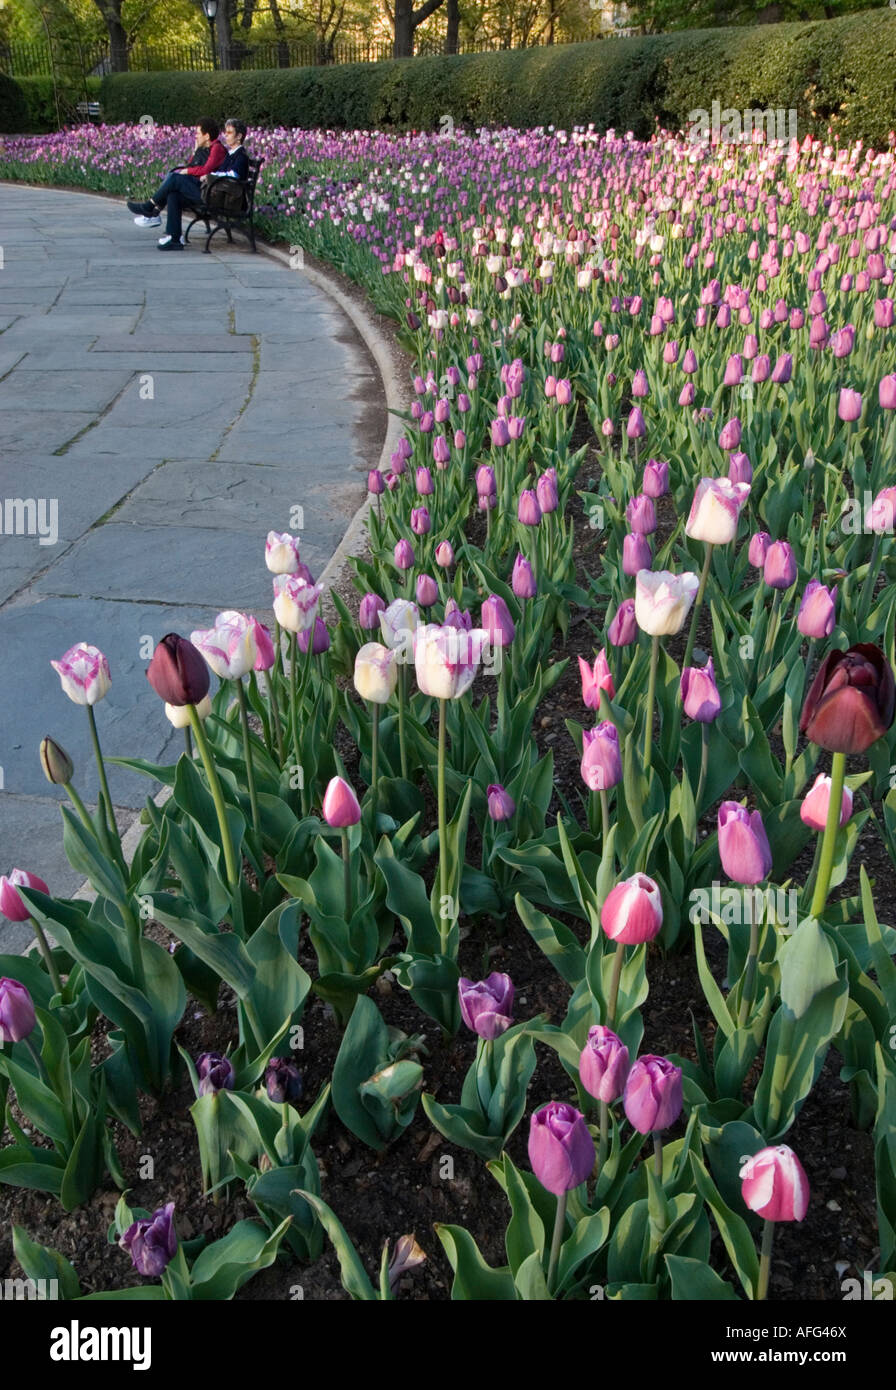 Tulips in the Conservatory Garden in Central Park, New York Stock Photo